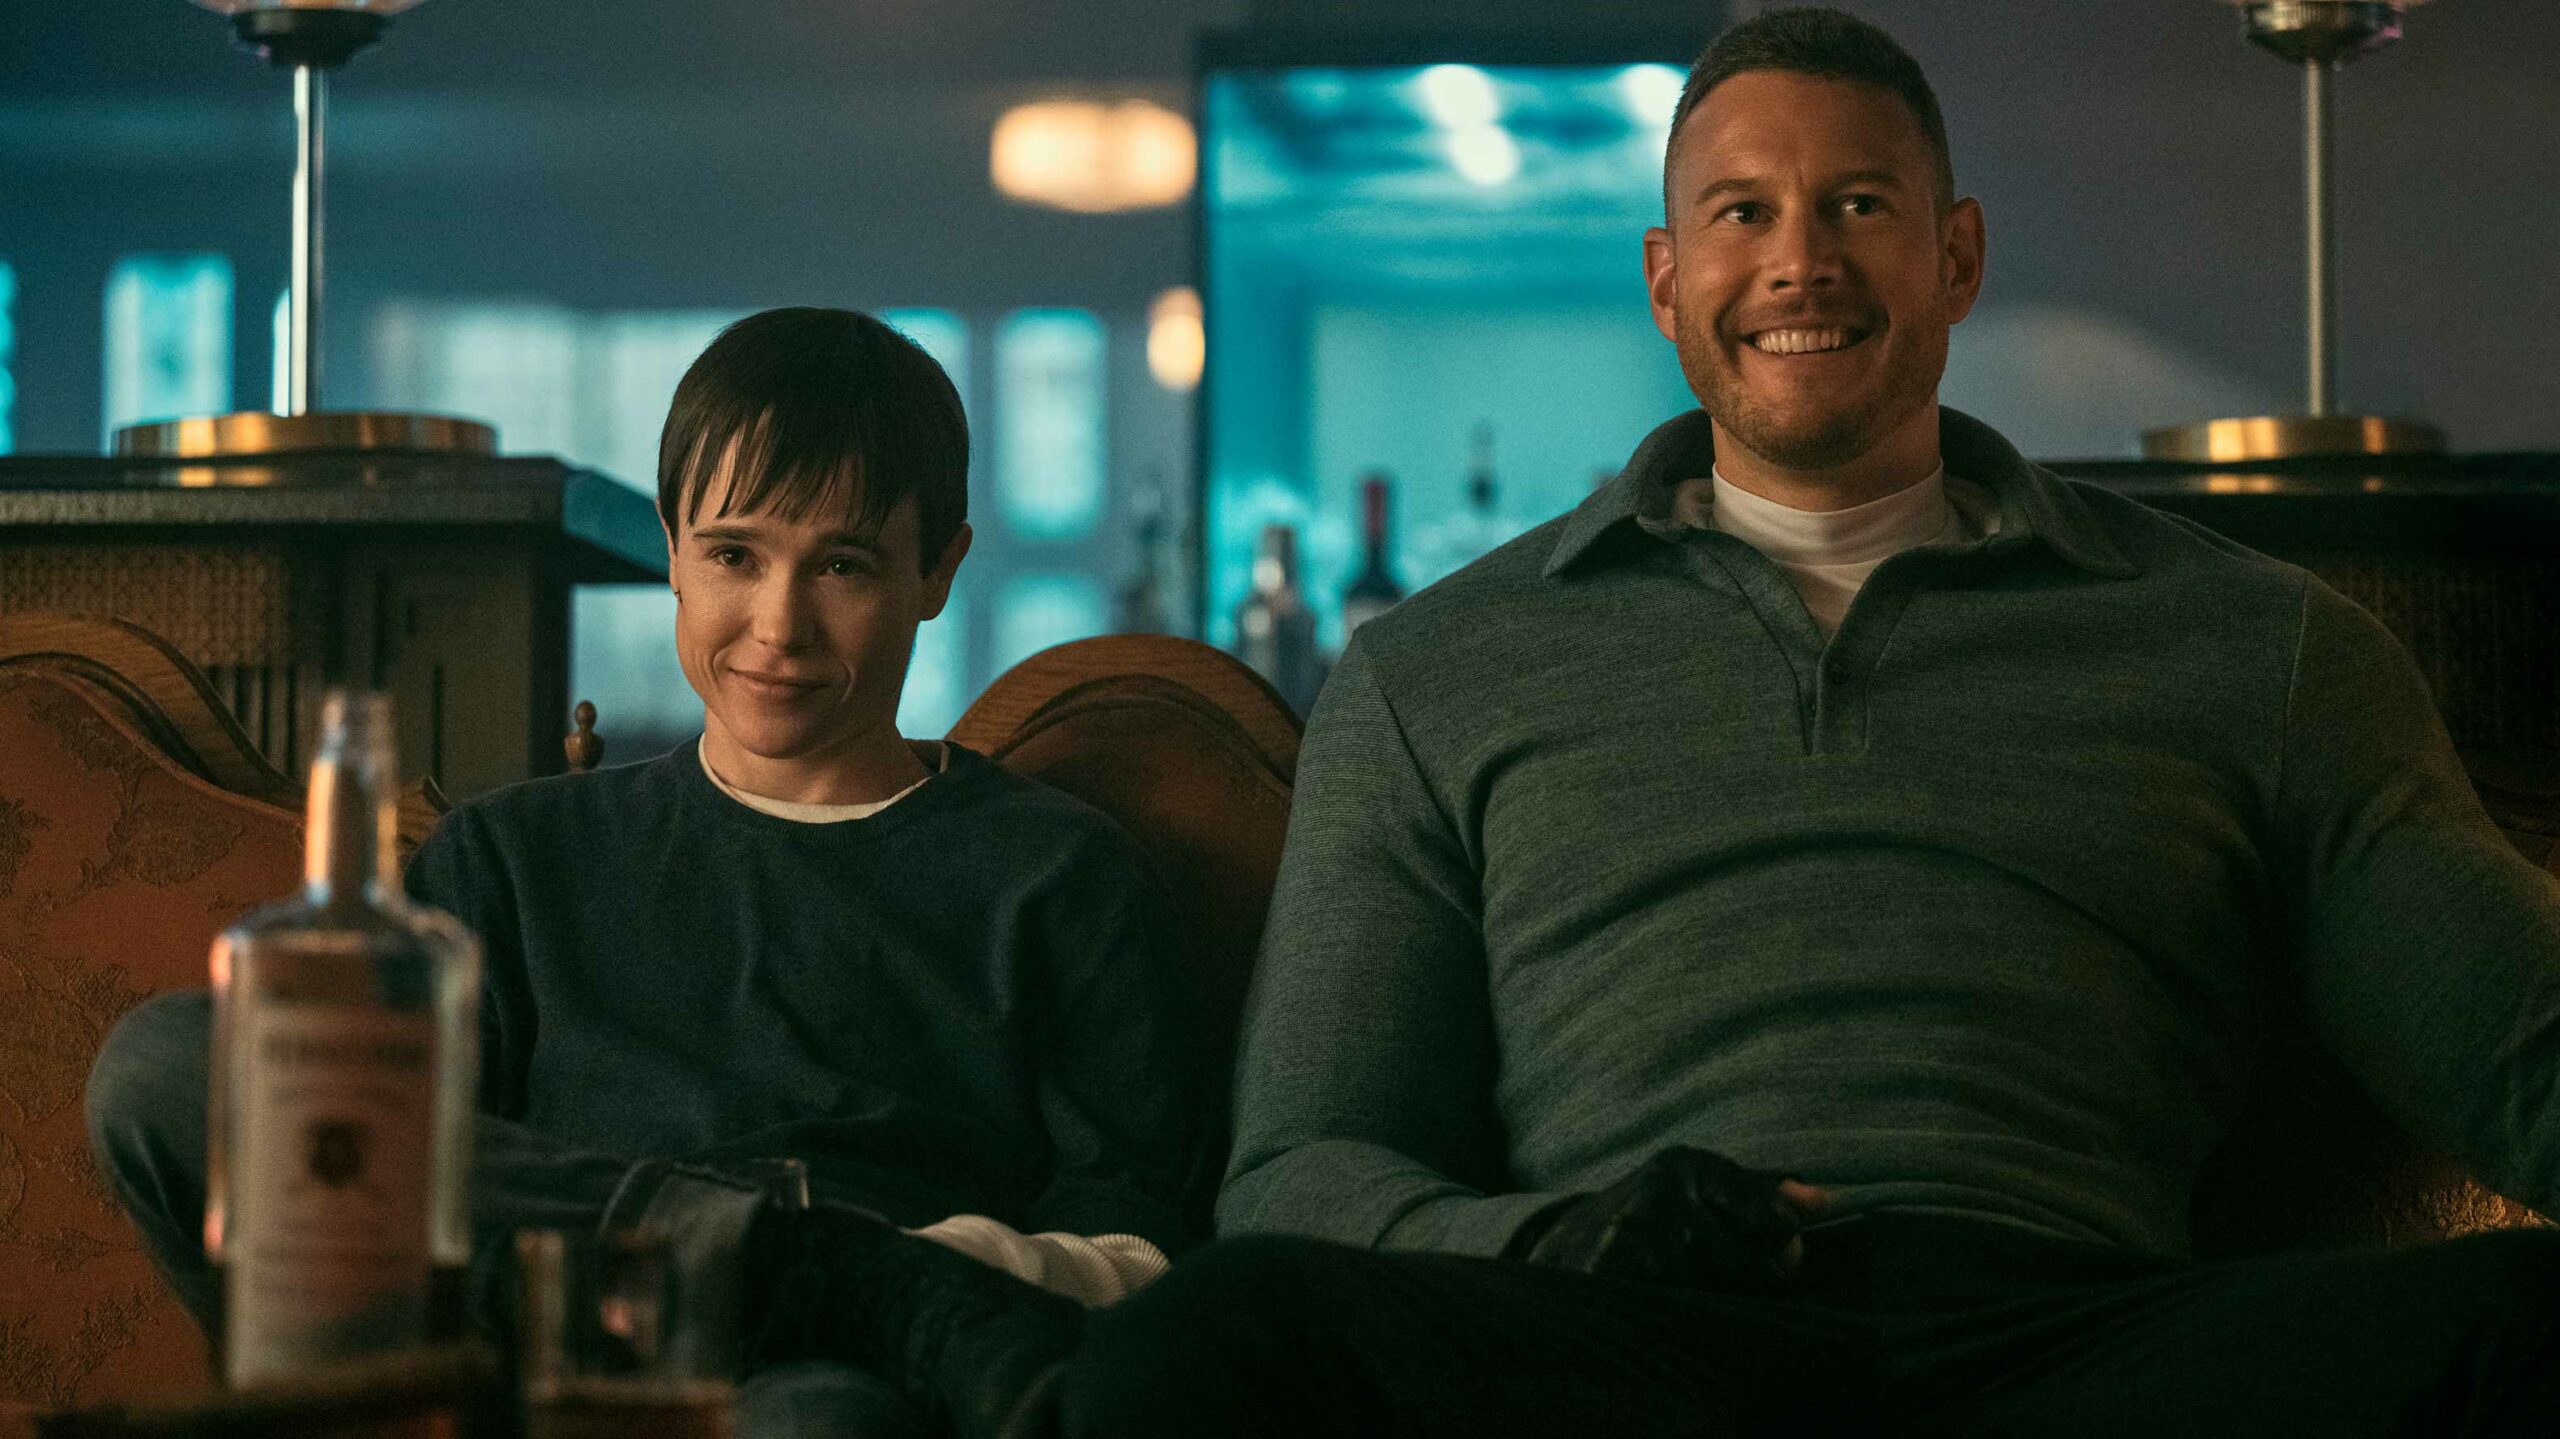 The Umbrella Academy. Elliot Page as Viktor and Tom Hopper as Luther are pictured. They are sitting on a coach looking happy.